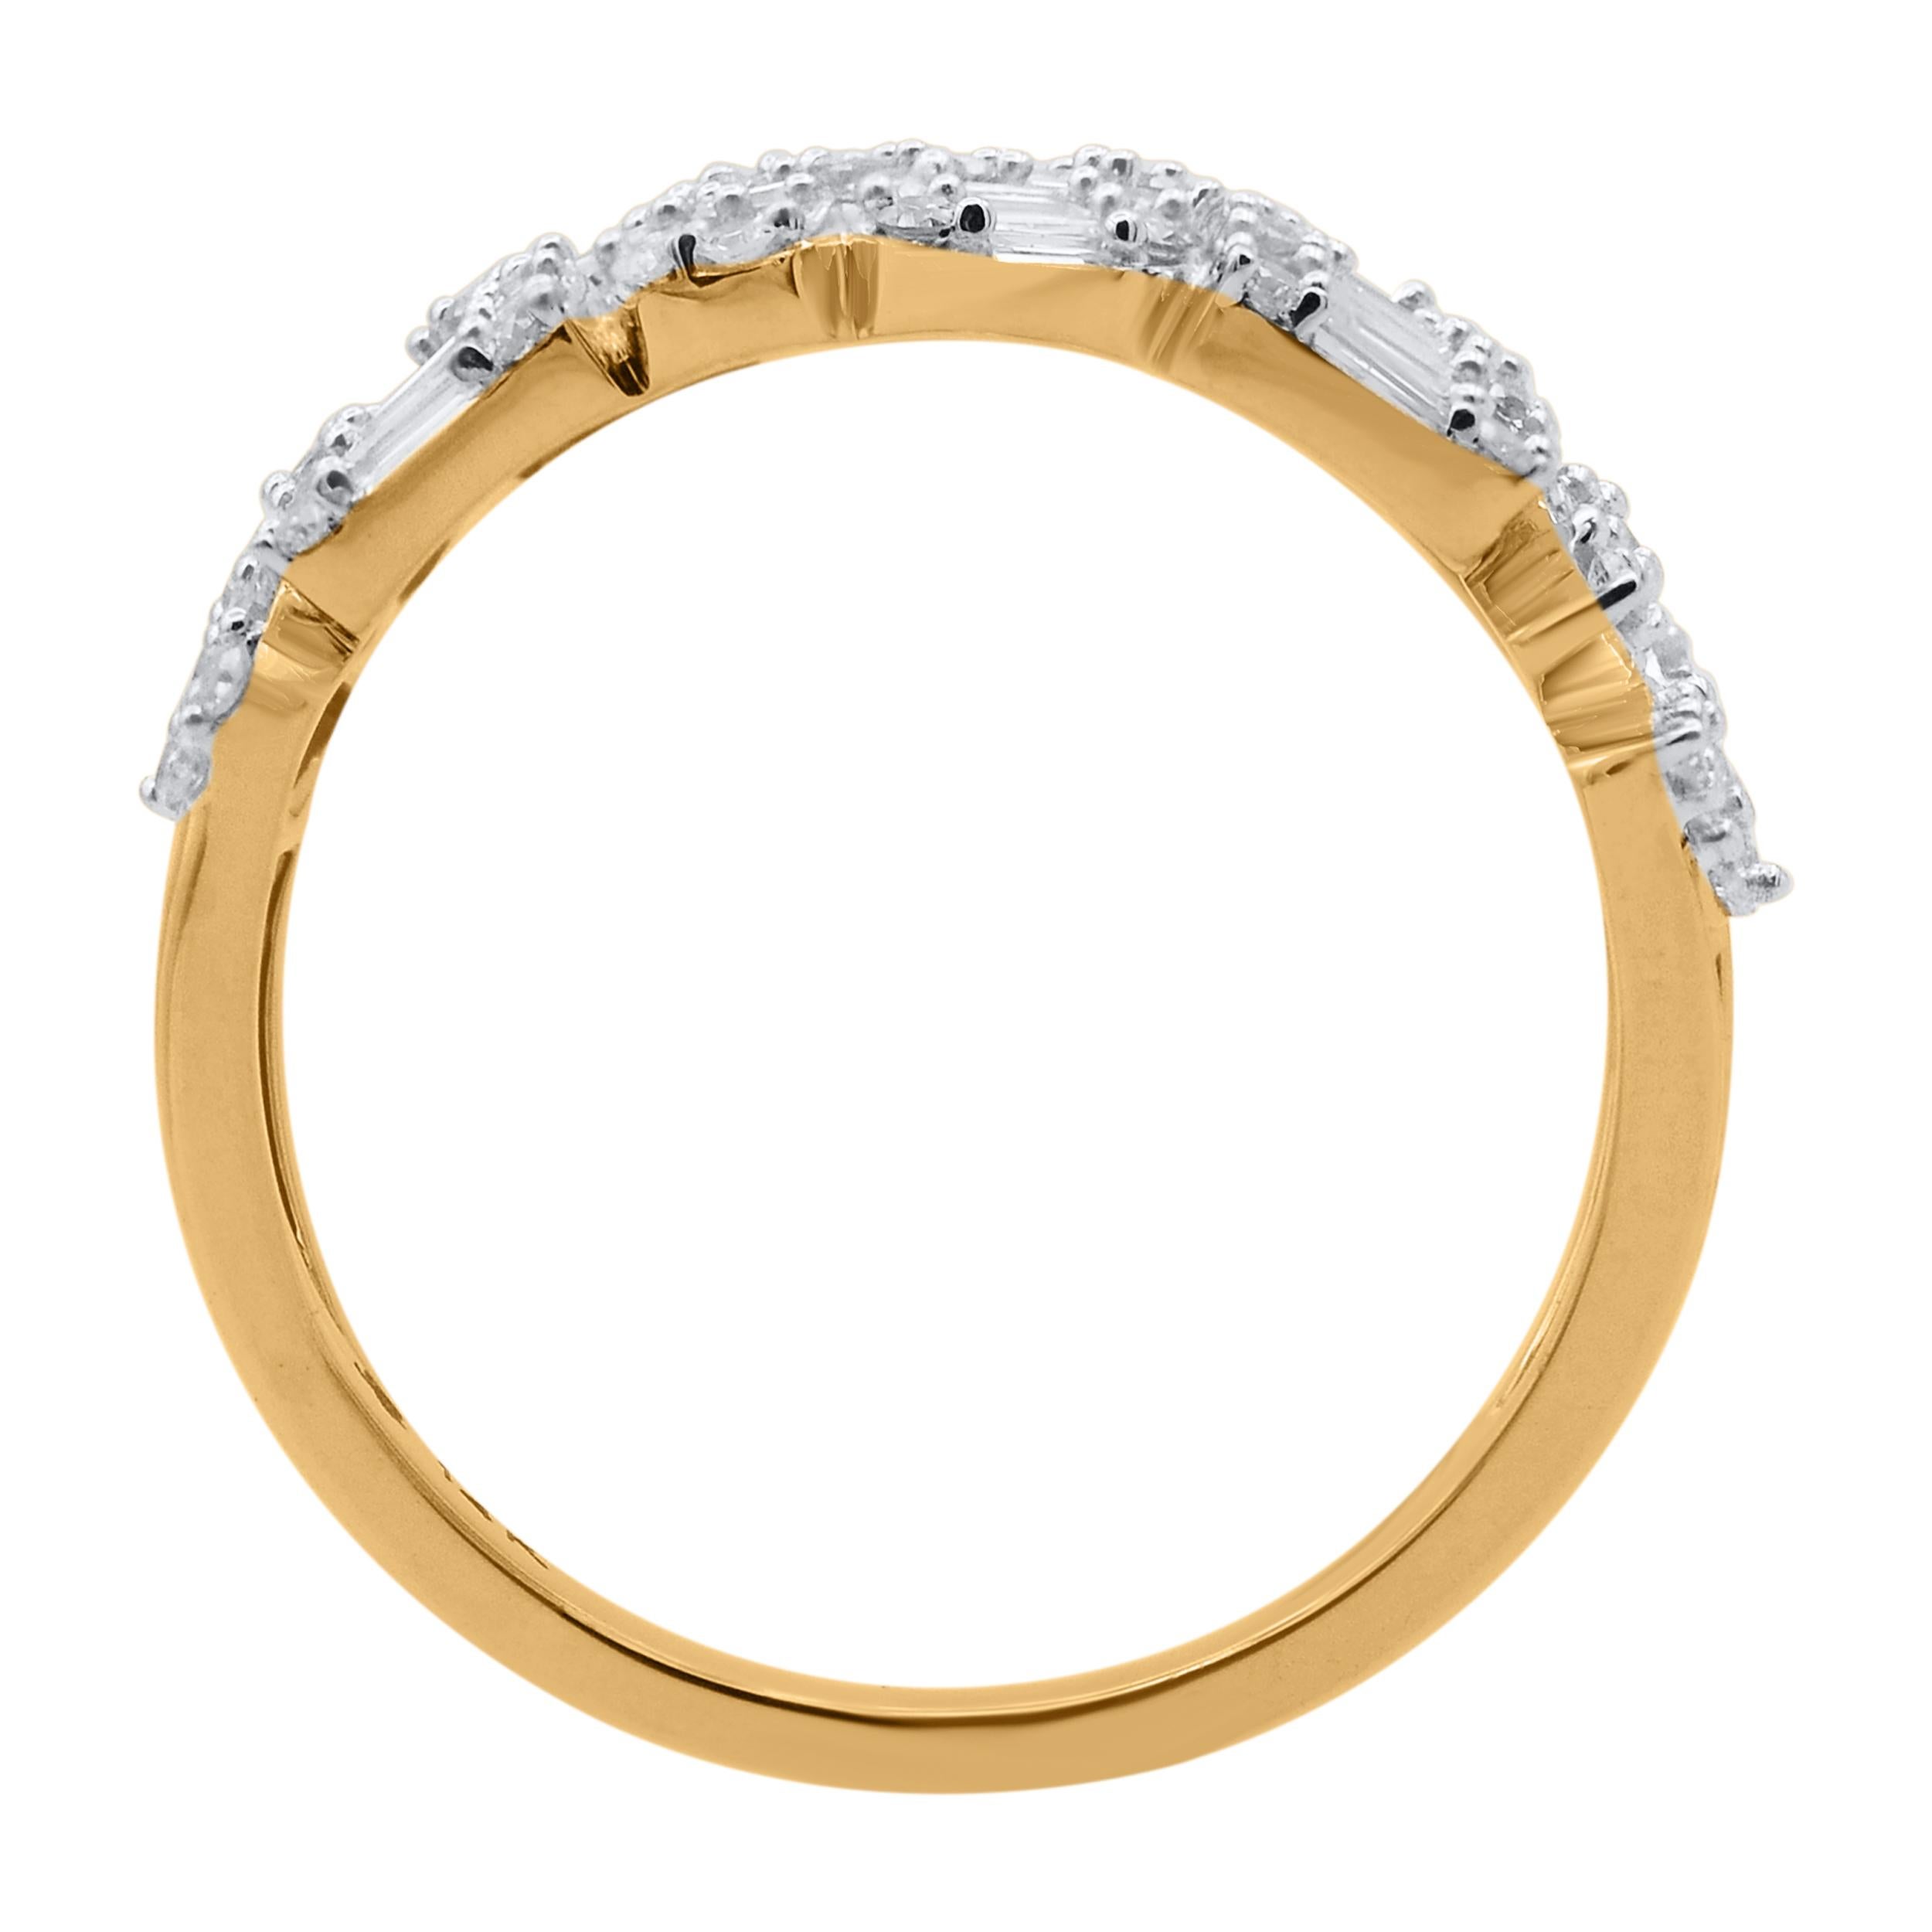 Bring charm to your look with this diamond ring. The ring is crafted from 14-karat gold in your choice of white, rose, or yellow, and features Round Brilliant 60 and Baguette - 63 white diamonds, Prongset, H-I color I2 clarity and a high polish